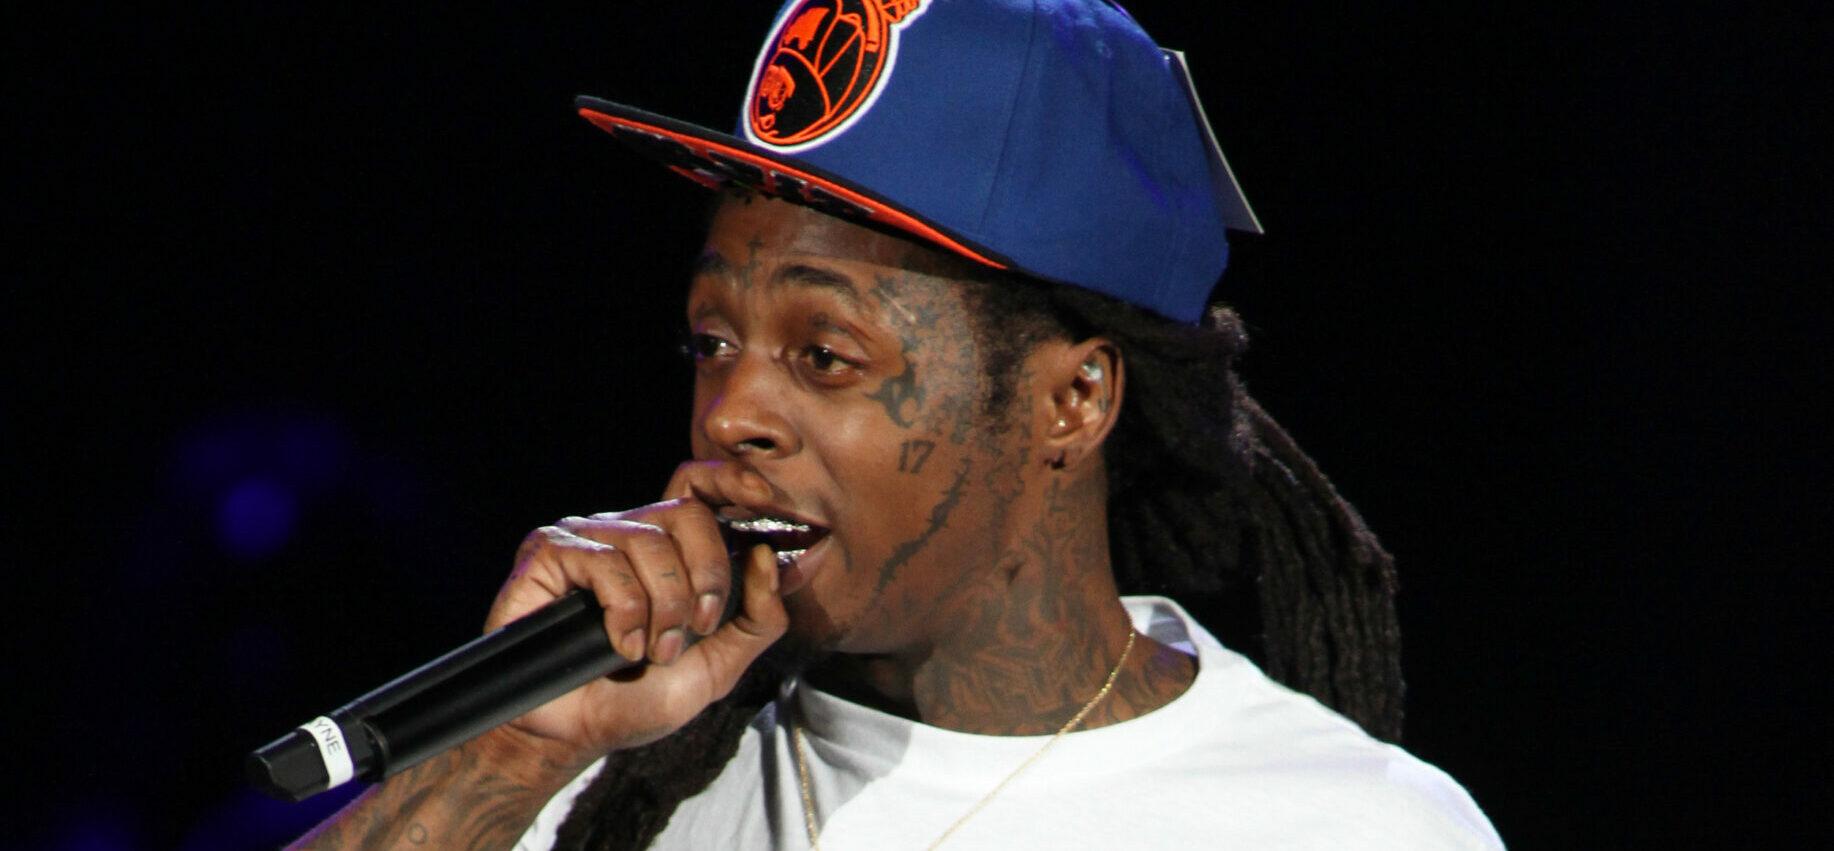 Lil Wayne Opens Up About His Memory Loss, Admits He Can’t Remember His Own Songs